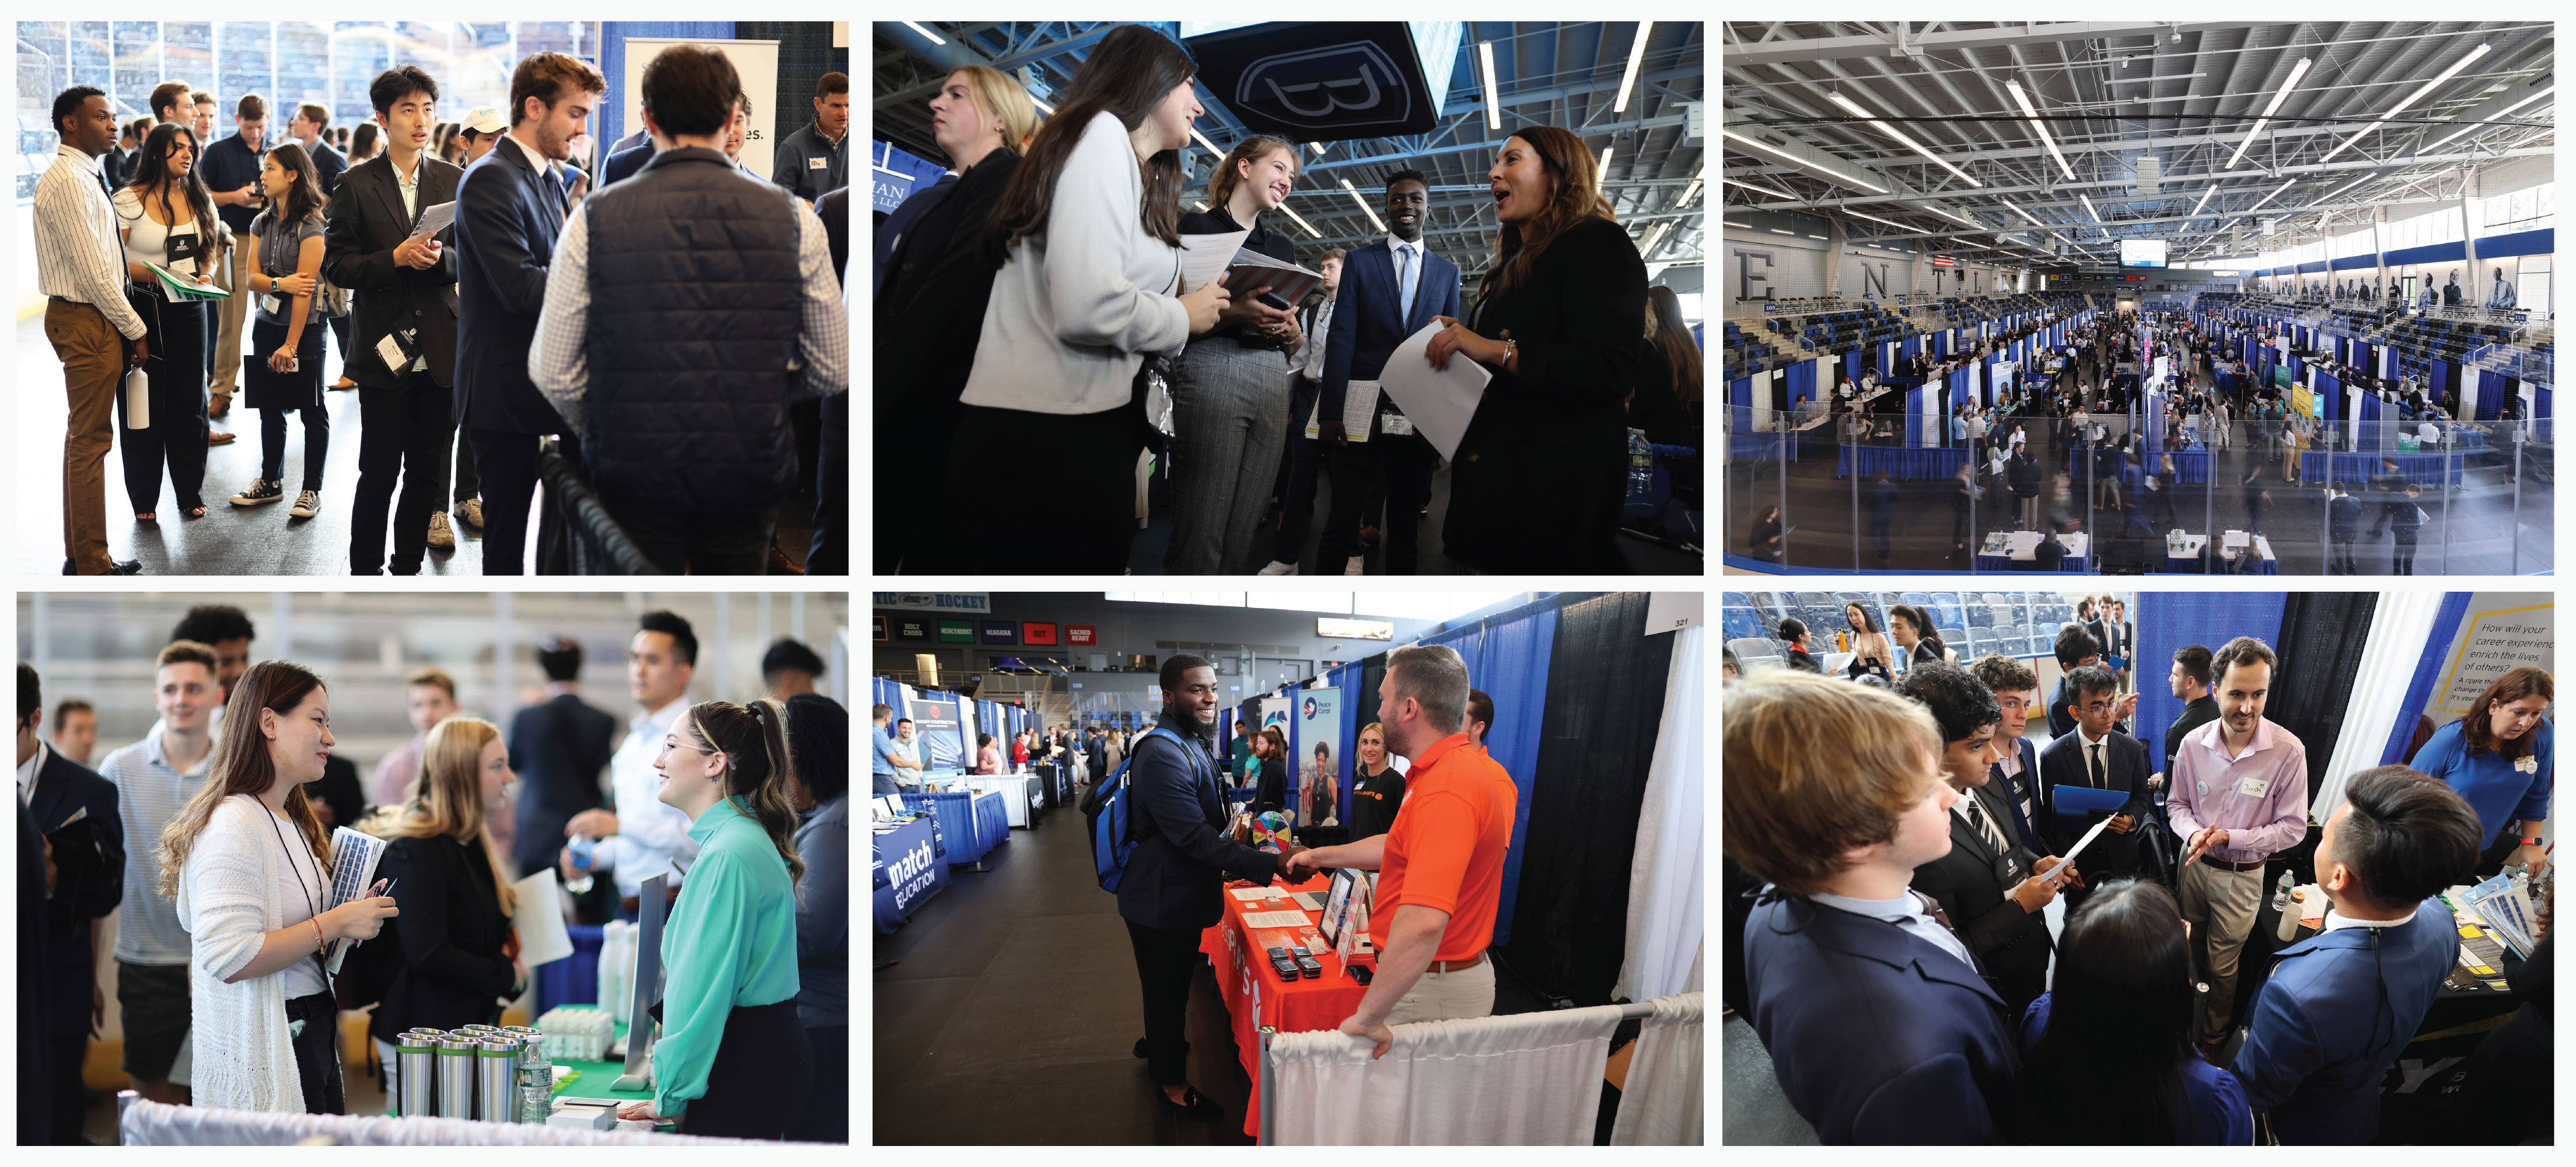 A collage of images from the career fair